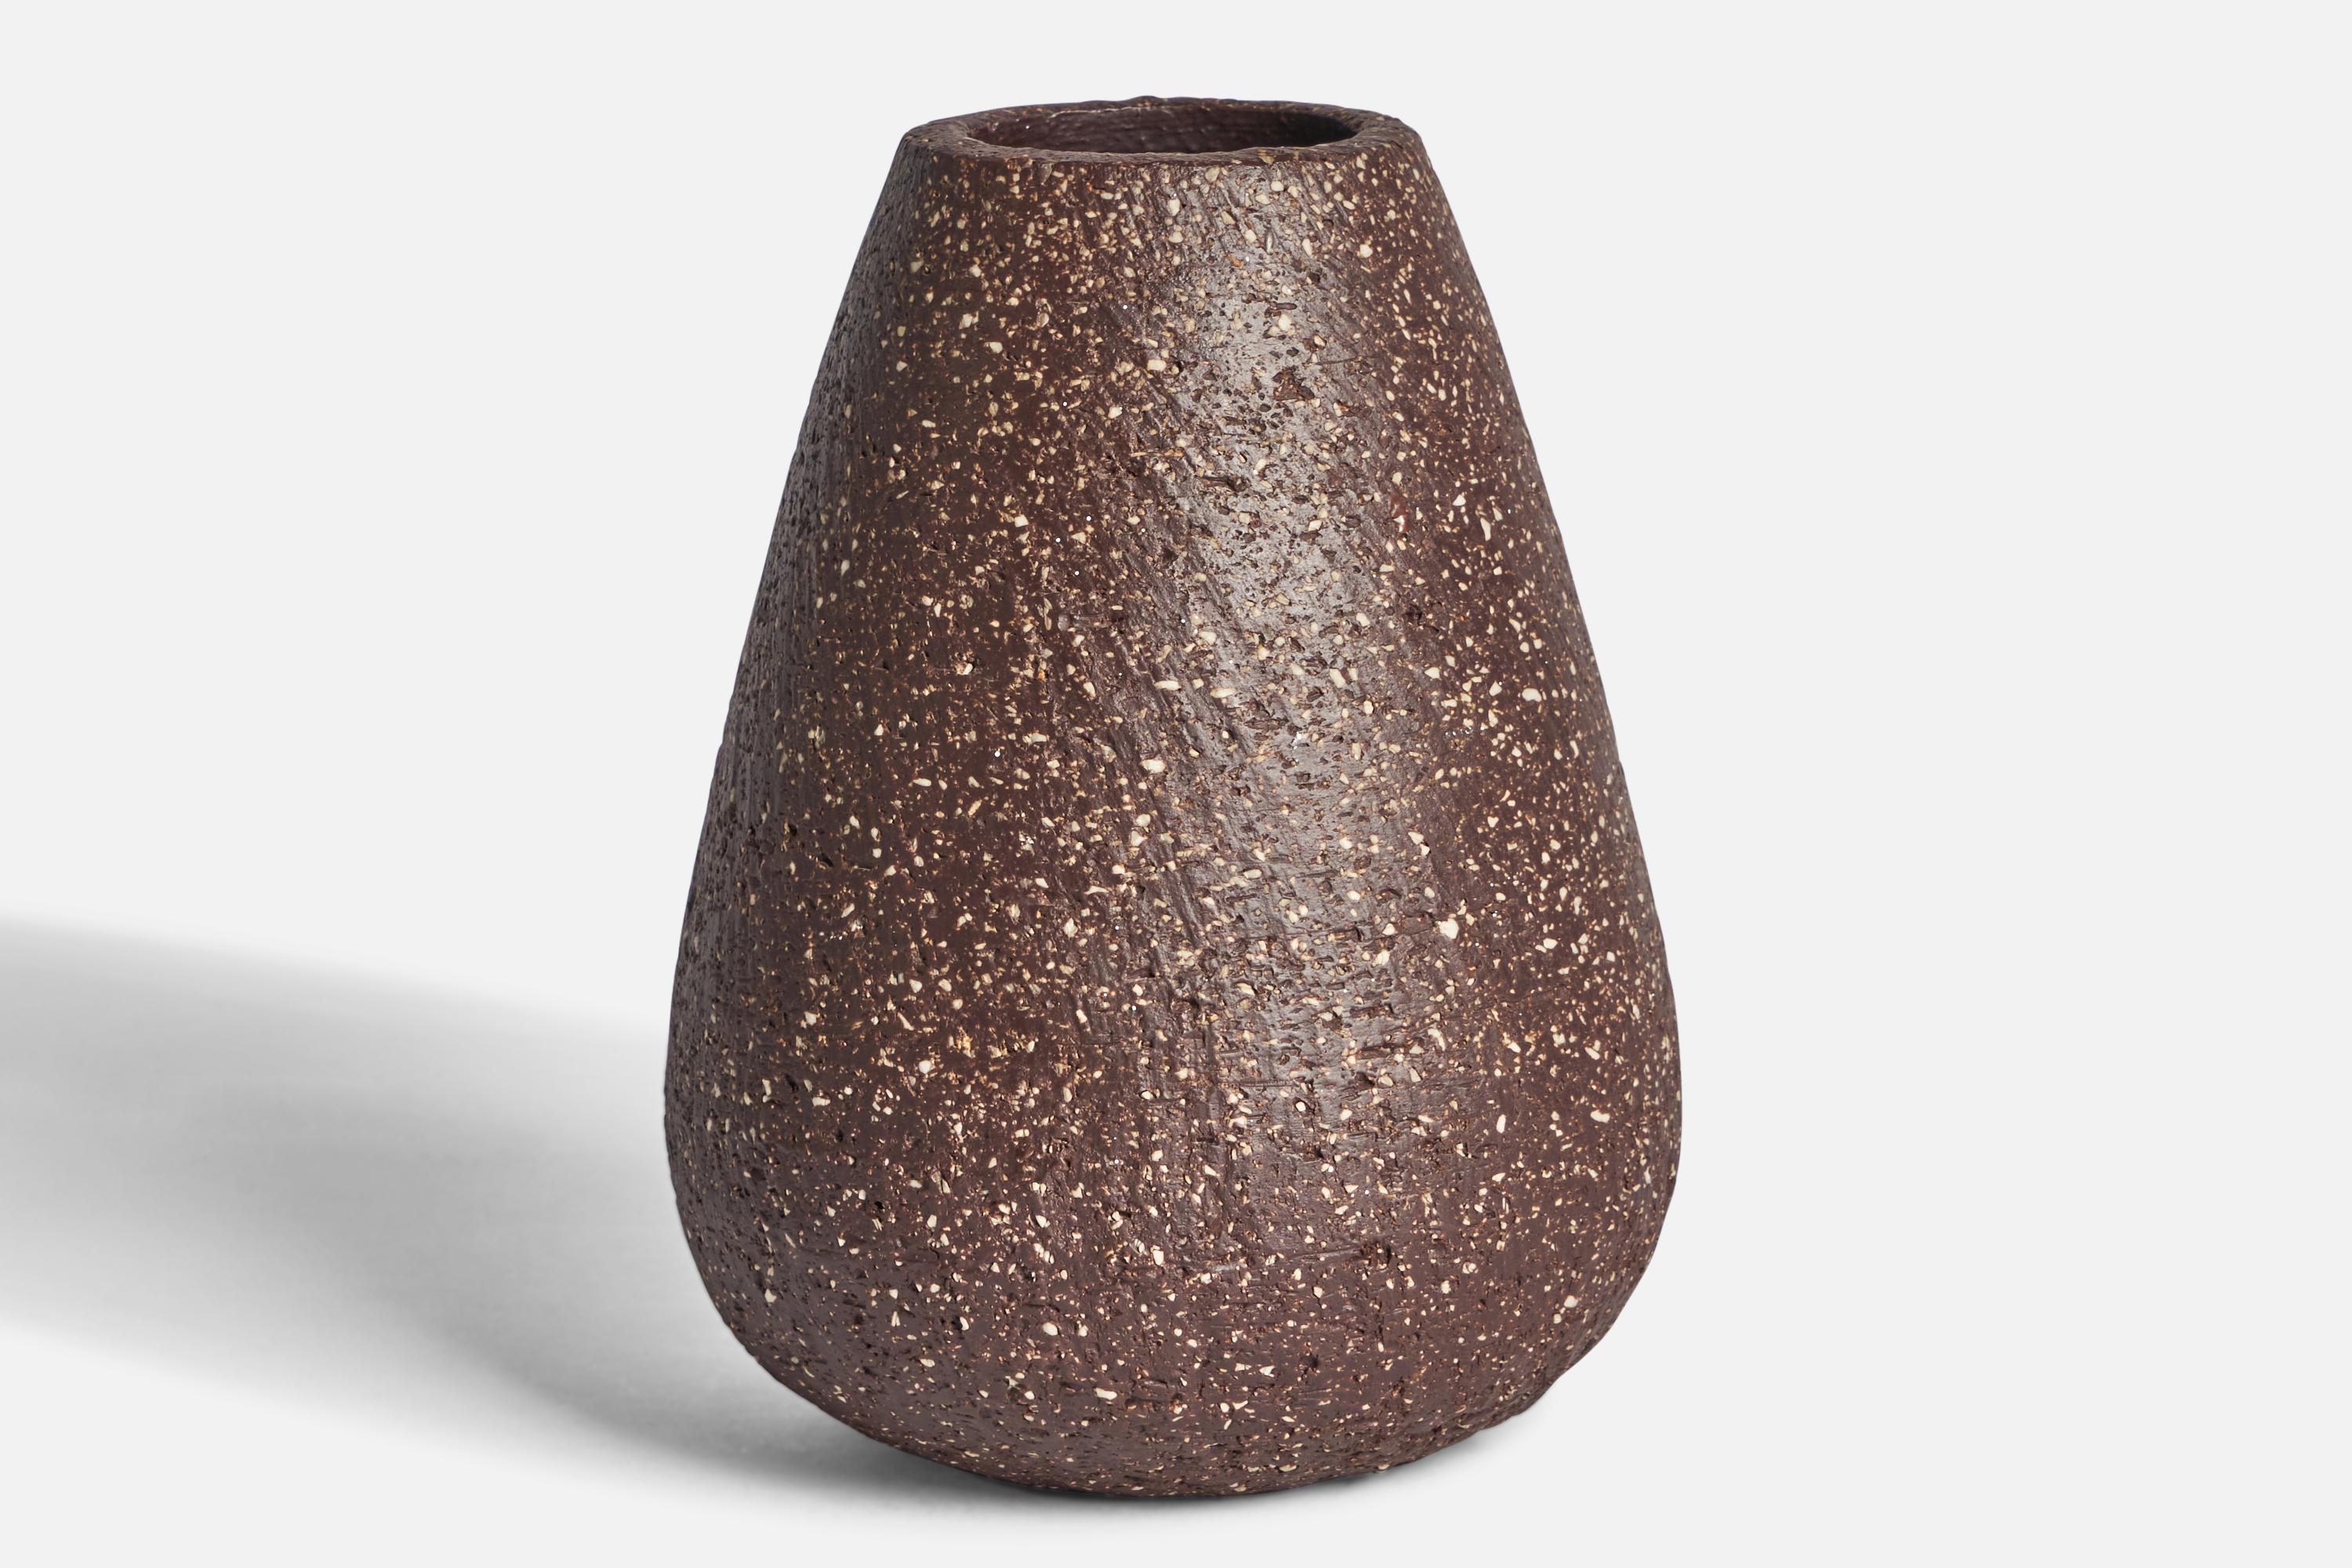 An unglazed brown stoneware vase designed by Gunnar Nylund and produced by Rörstrand, Sweden, 1940s.